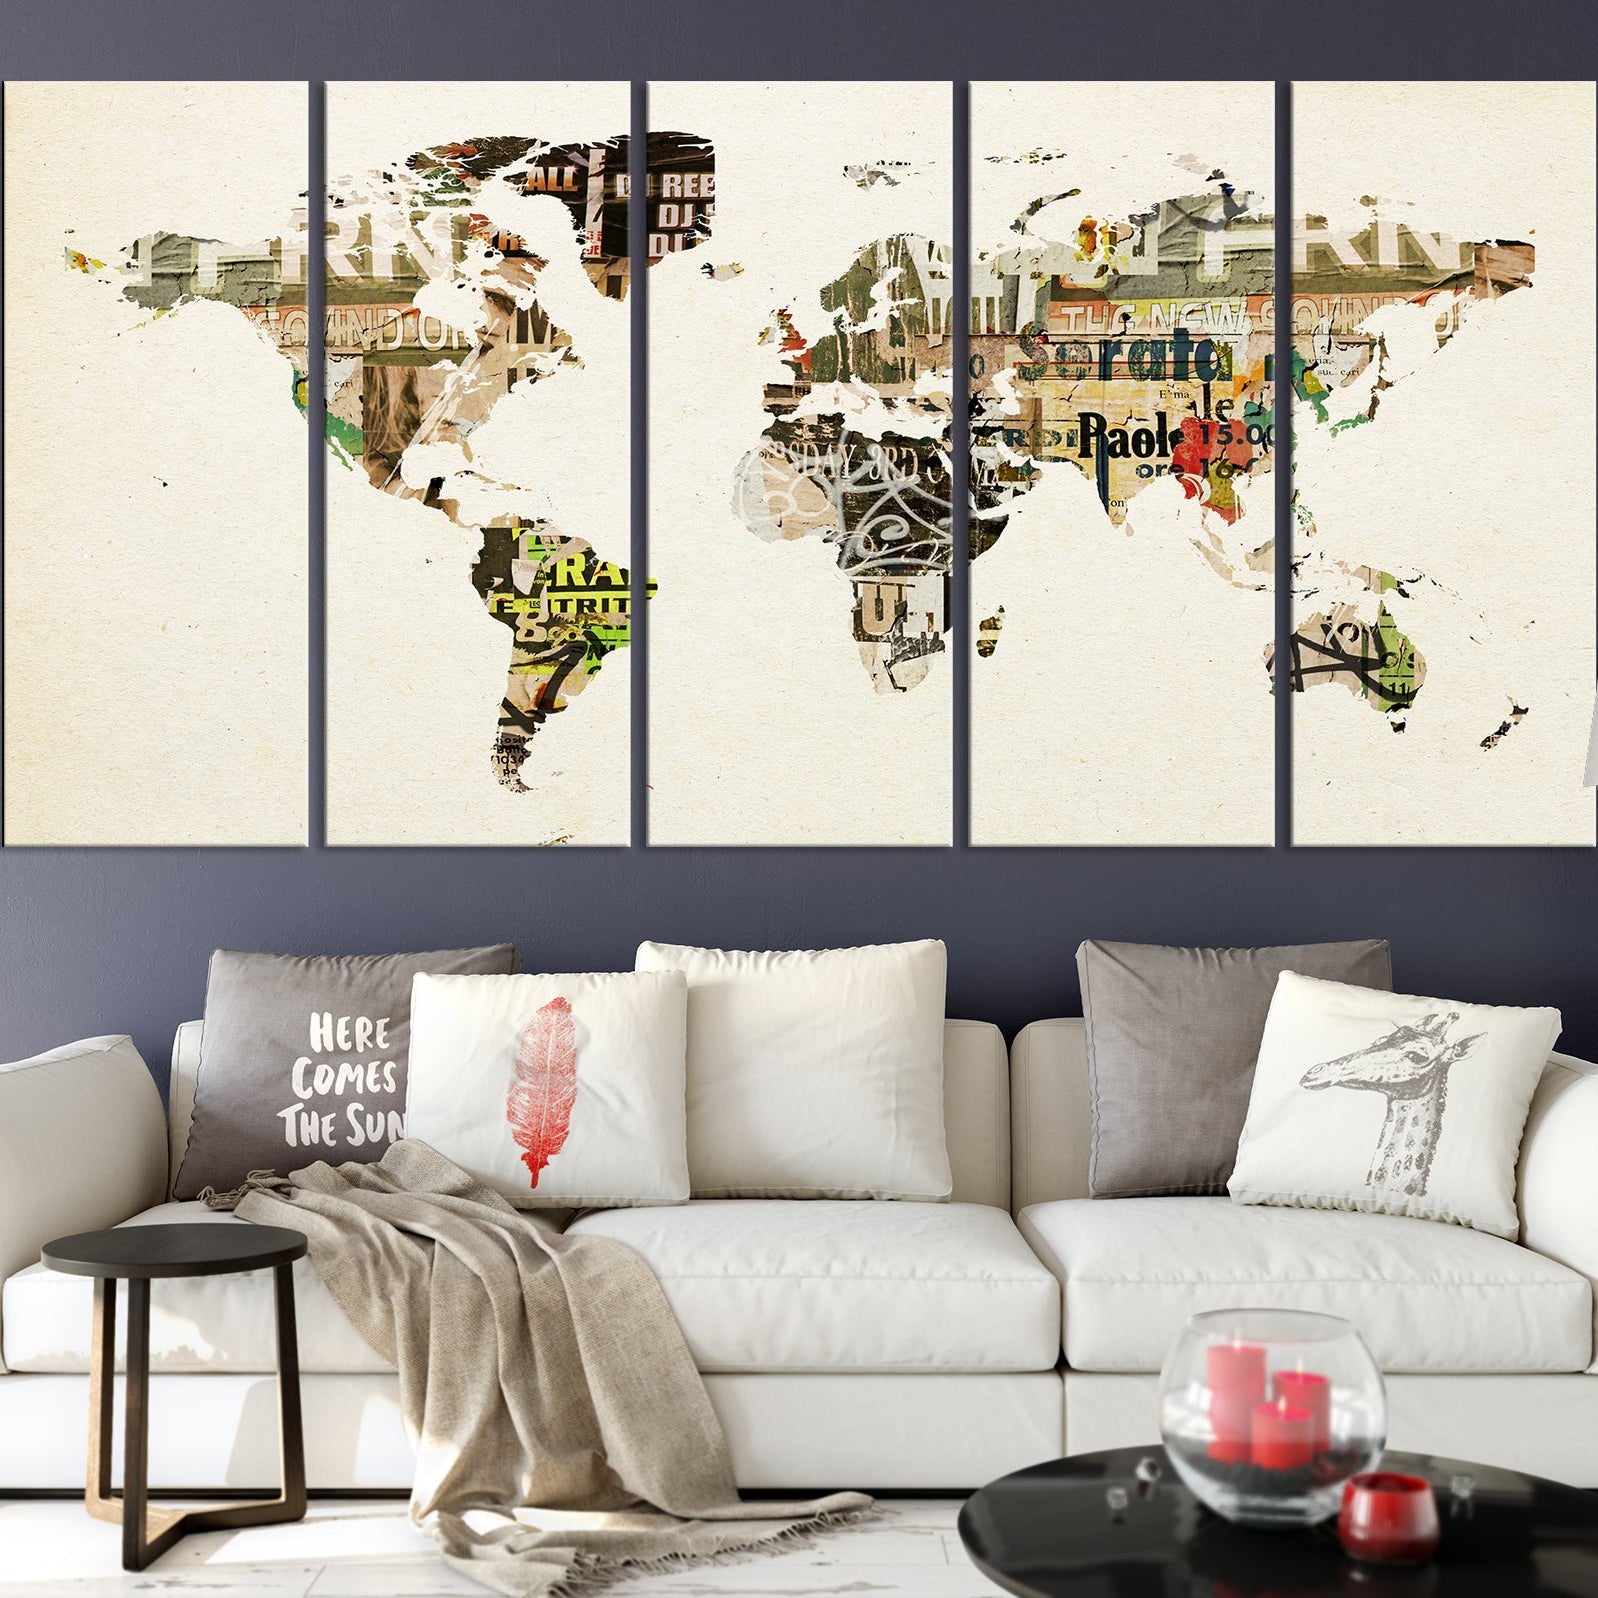 World Map with Grunge Posters Large Canvas Art Print, World Map for Home Art Print No:022-Giclee Canvas Print-World Map Wall Art-5 Panel-Per P. 12x32-Extra Large Wall Art Canvas Print